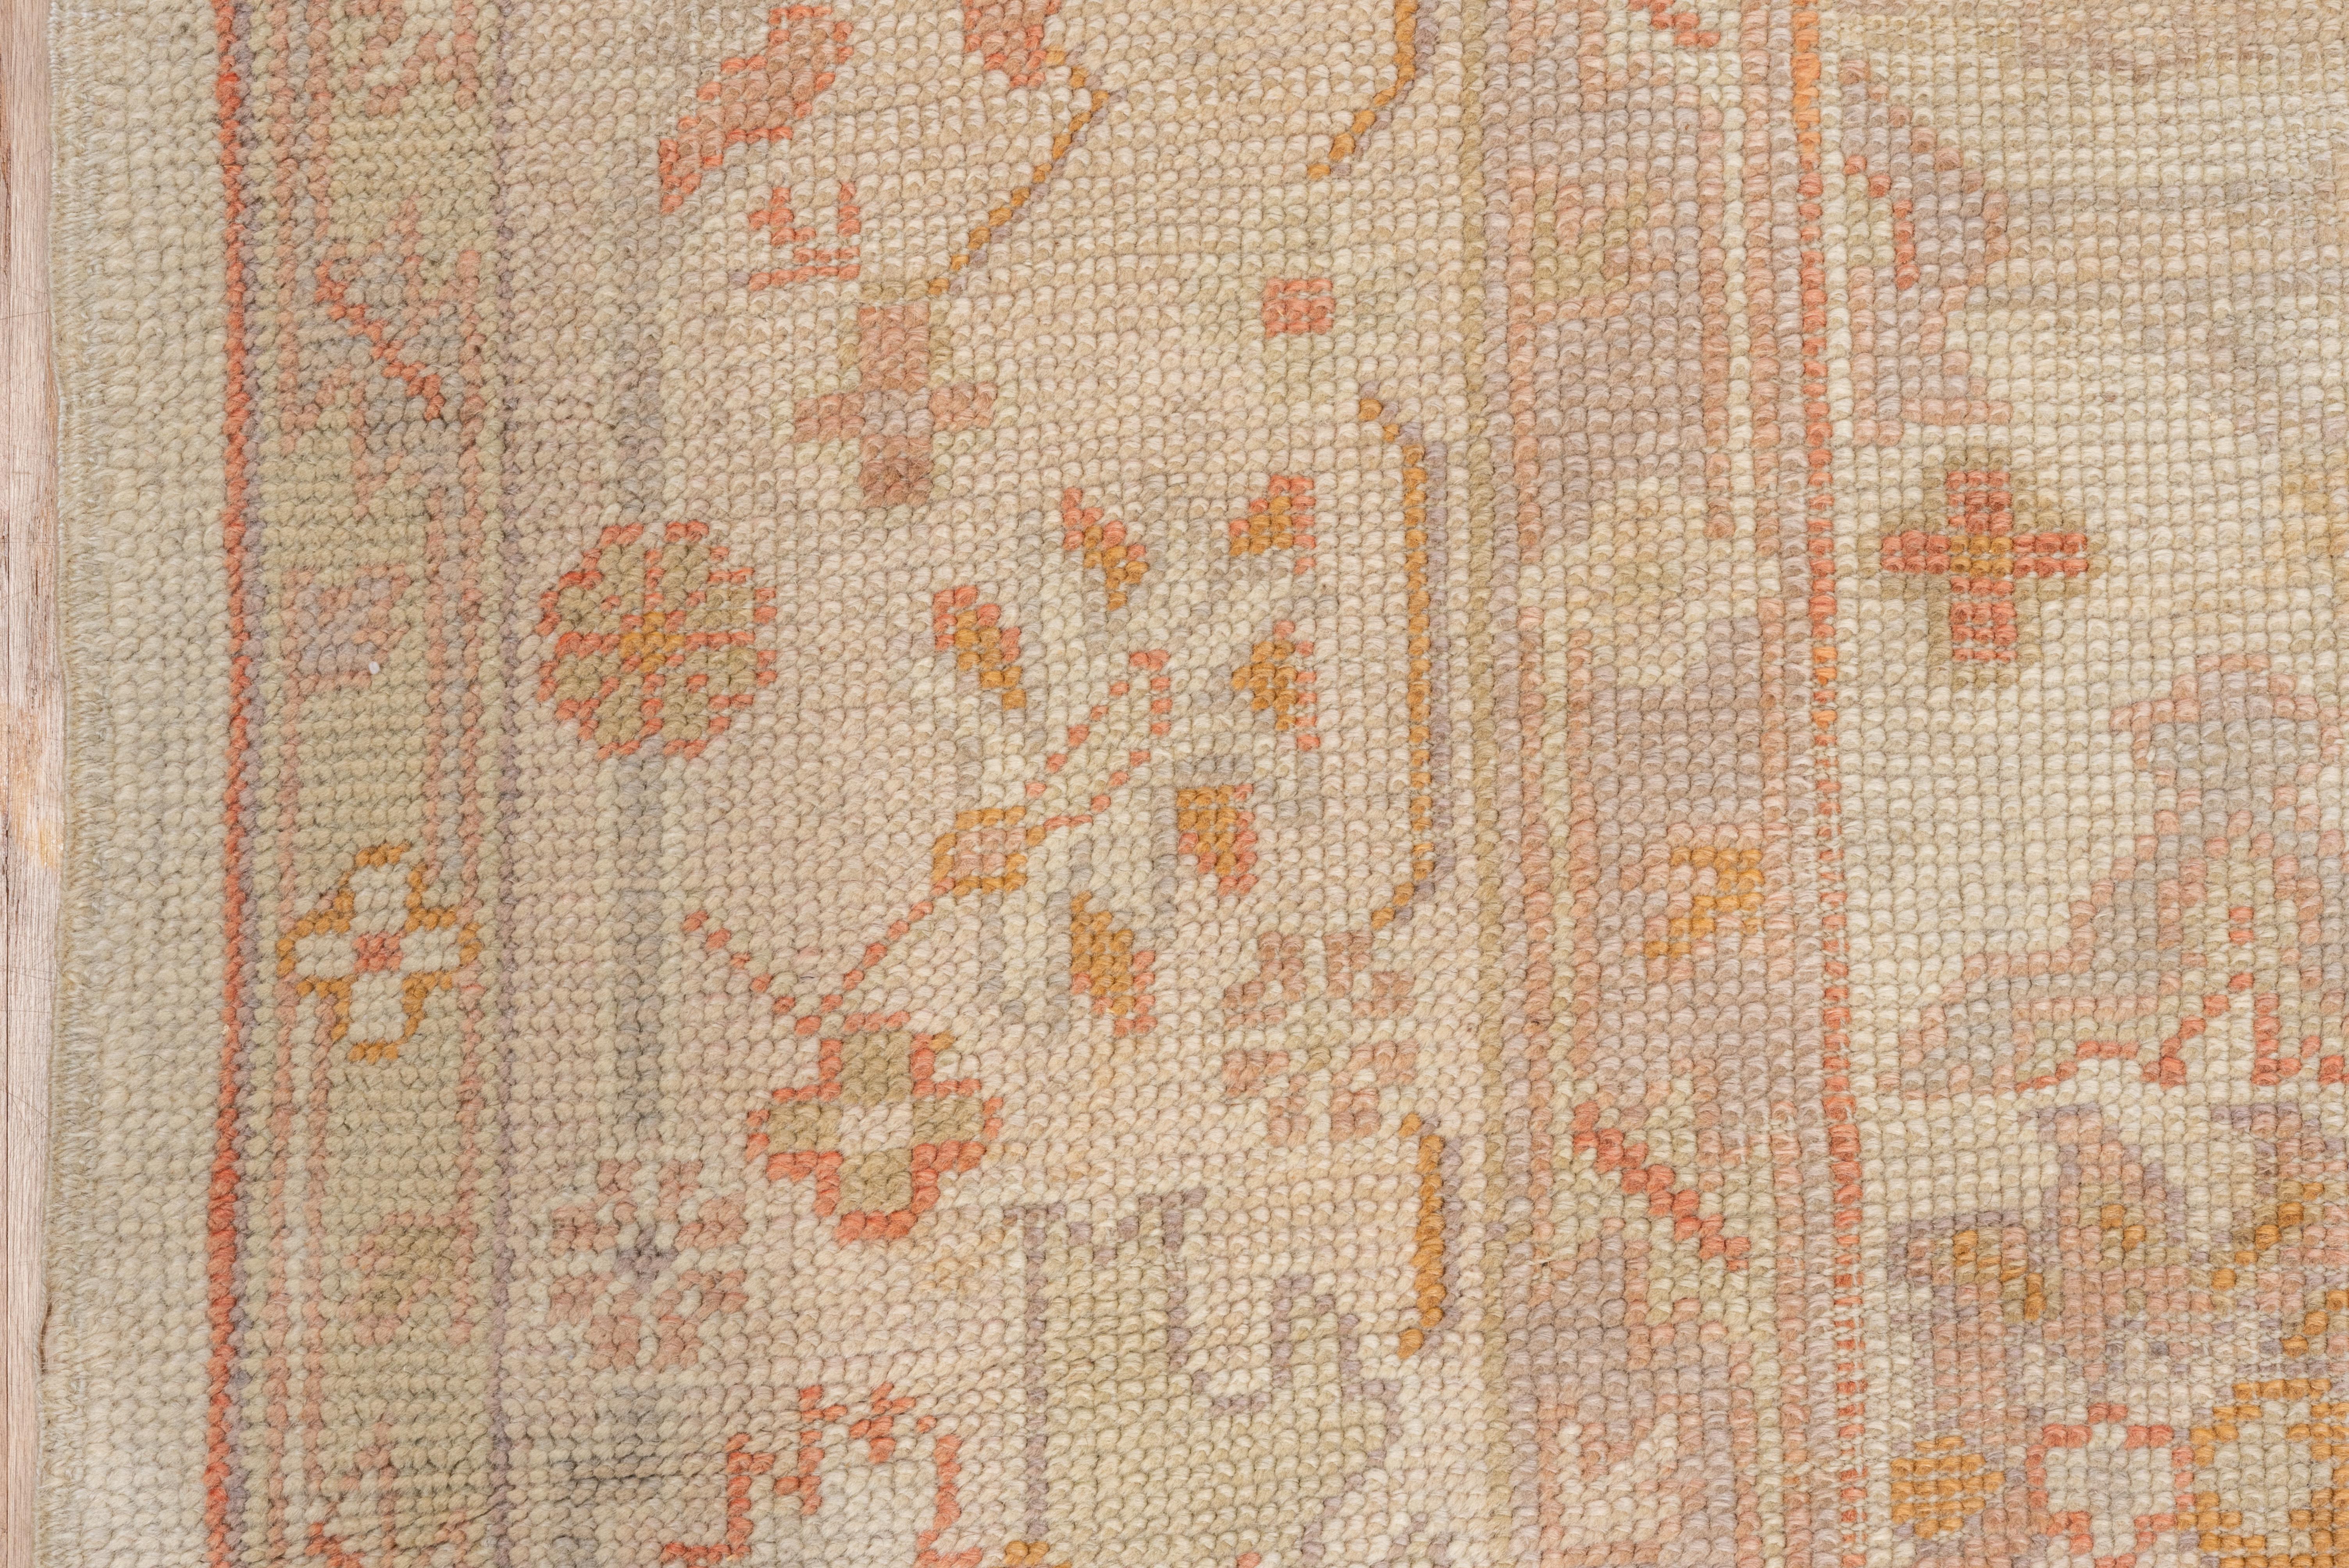 This west Anatolian, coarsely woven room size shows an old ivory-sand field with a disjoint version of the all-over Harshang palmette pattern accented in tangerine-rust. Powder border with off white cartouches, lotus palmettes and oblique floral